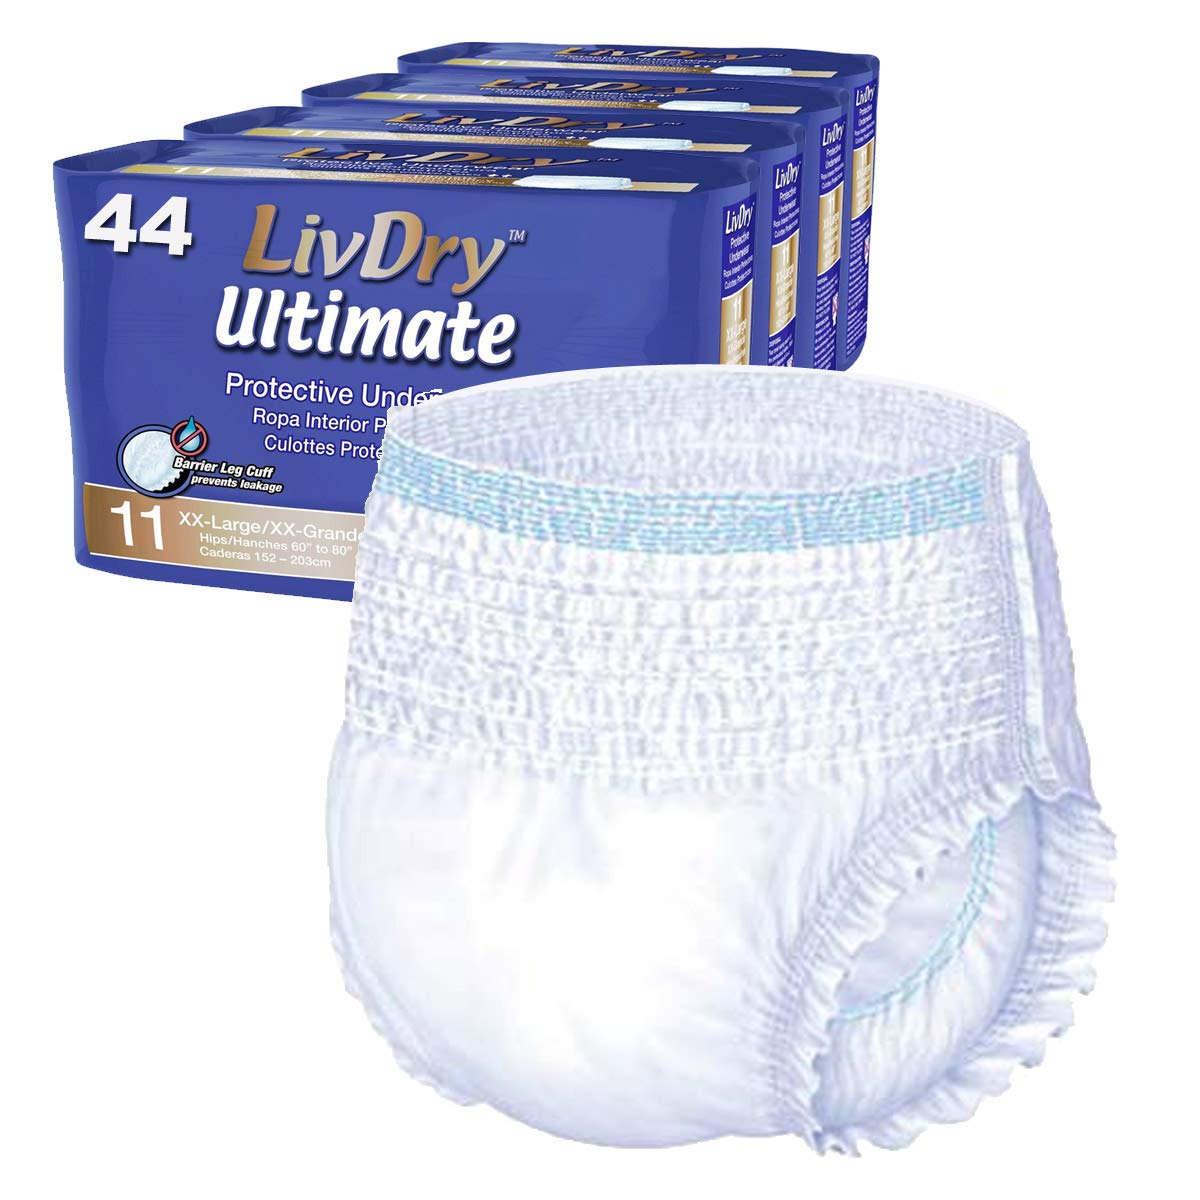 LivDry Ultimate XXL Adult Incontinence Underwear, High Absorbency, Leak Cuff Protection, XX-Large, 44-Pack